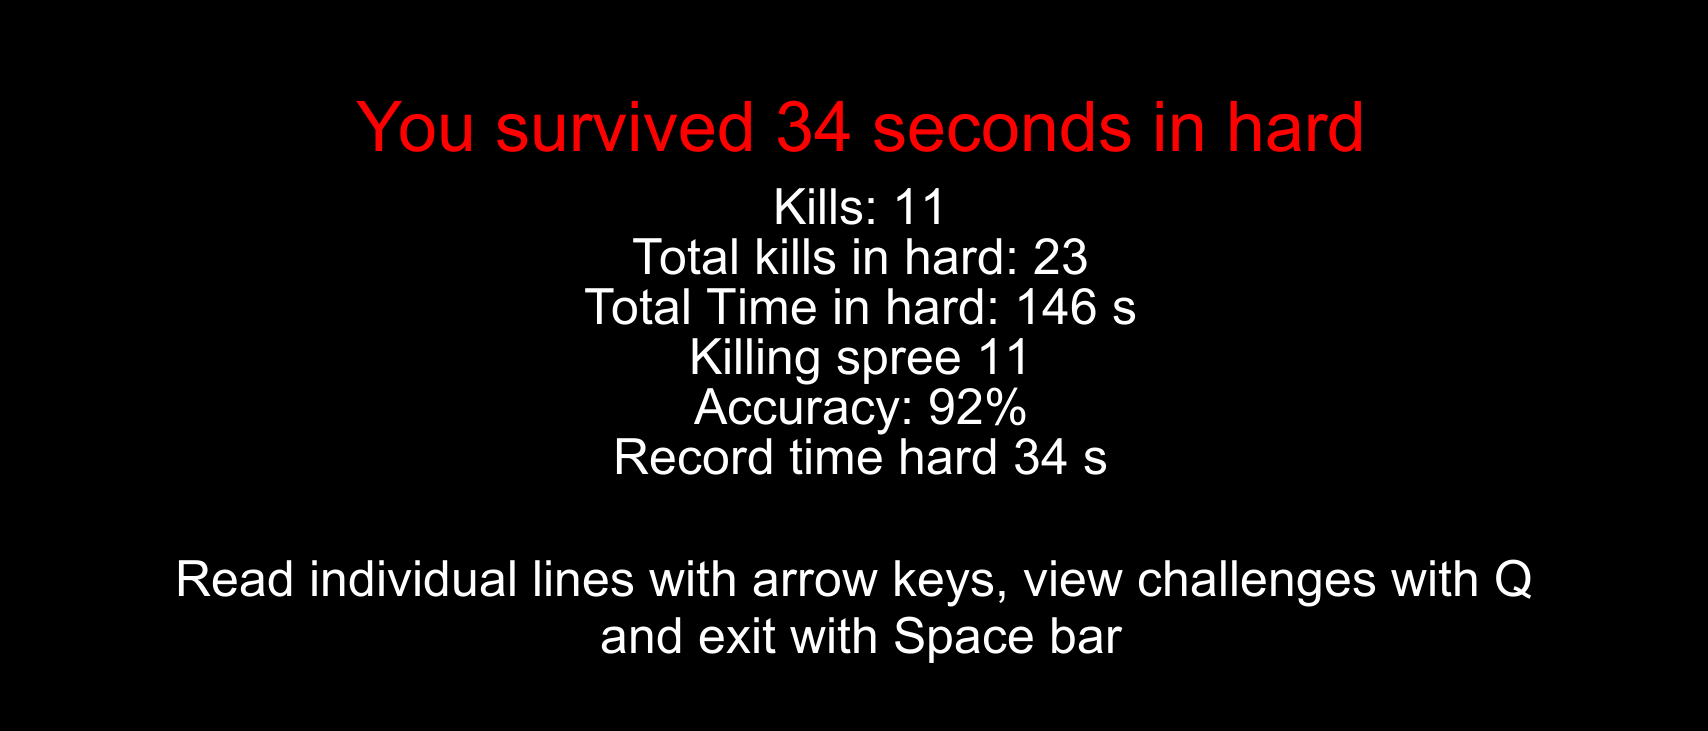 A screenshot of someone's results in endless mode, the first line says: You survived 34 seconds in hard, followed by other statistics.